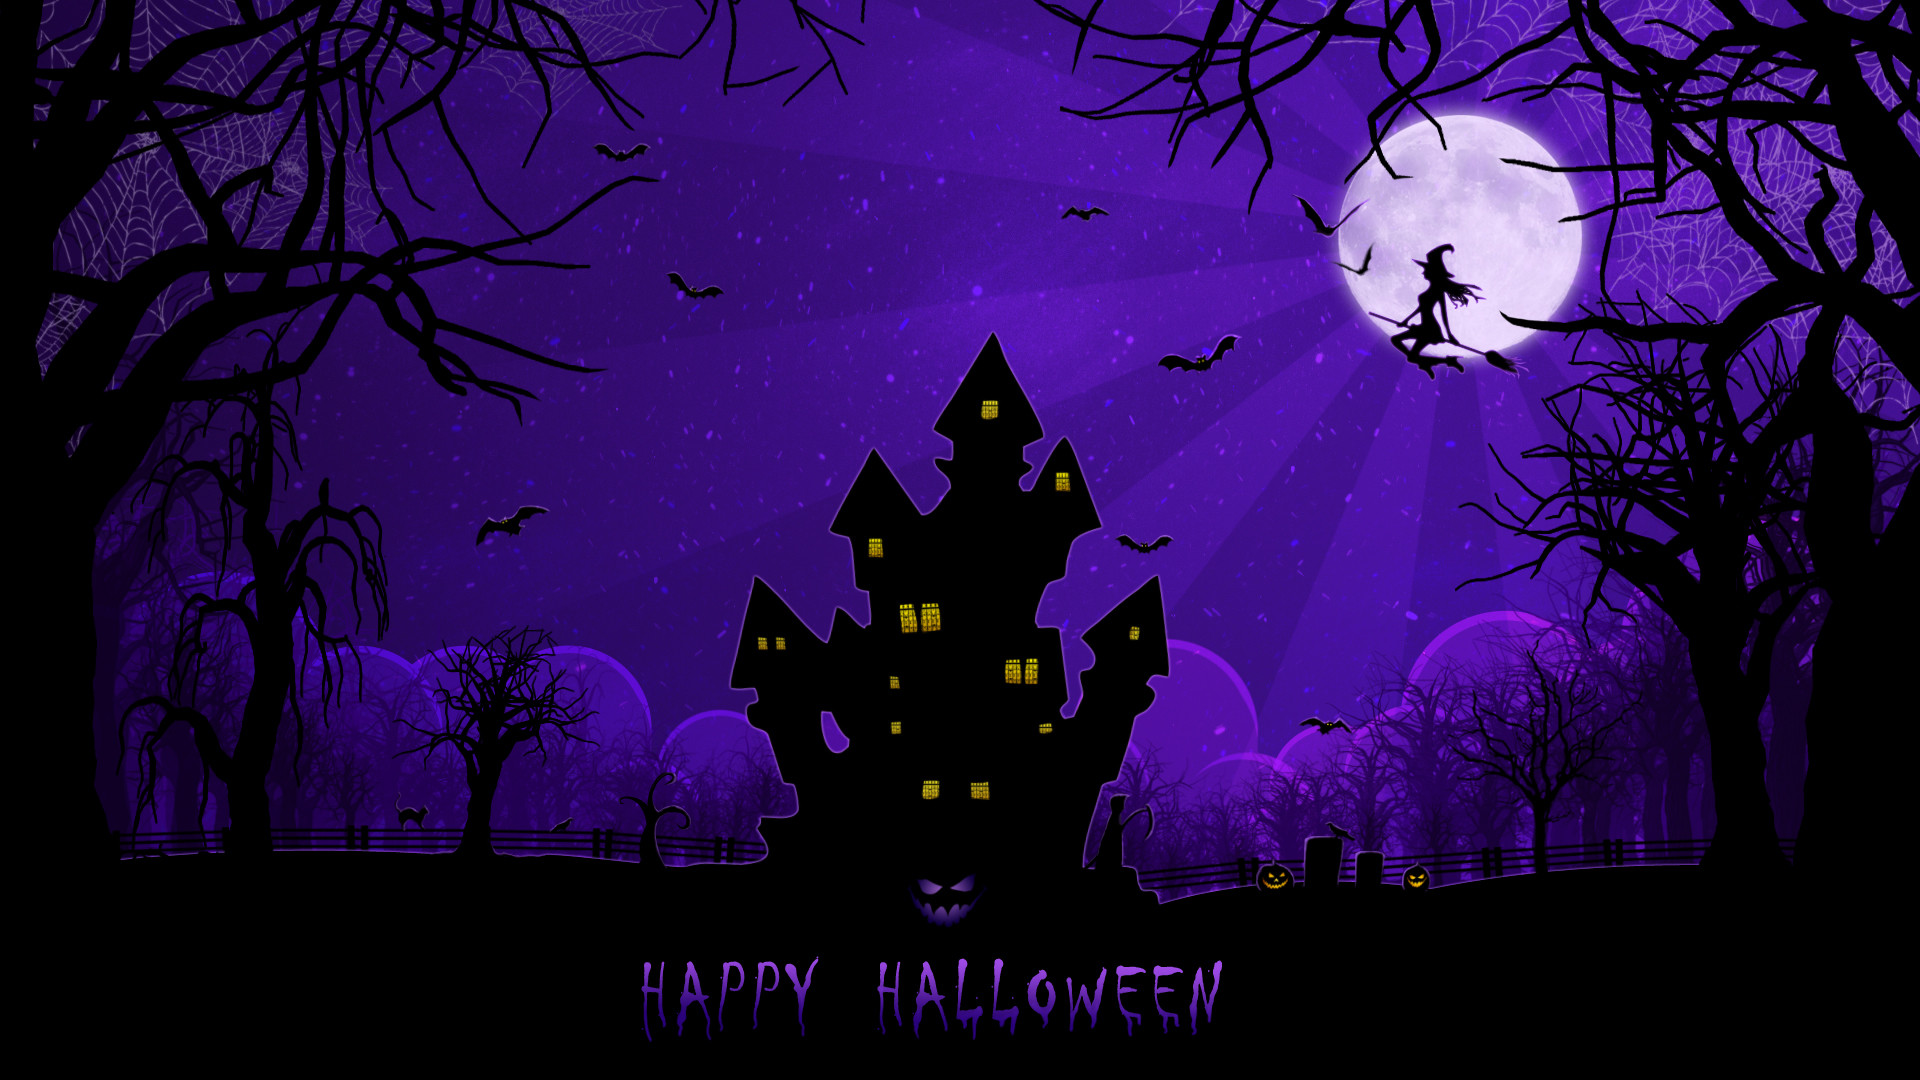 1920x1080 ... Download Halloween Wallpapers In 2K and Full HD